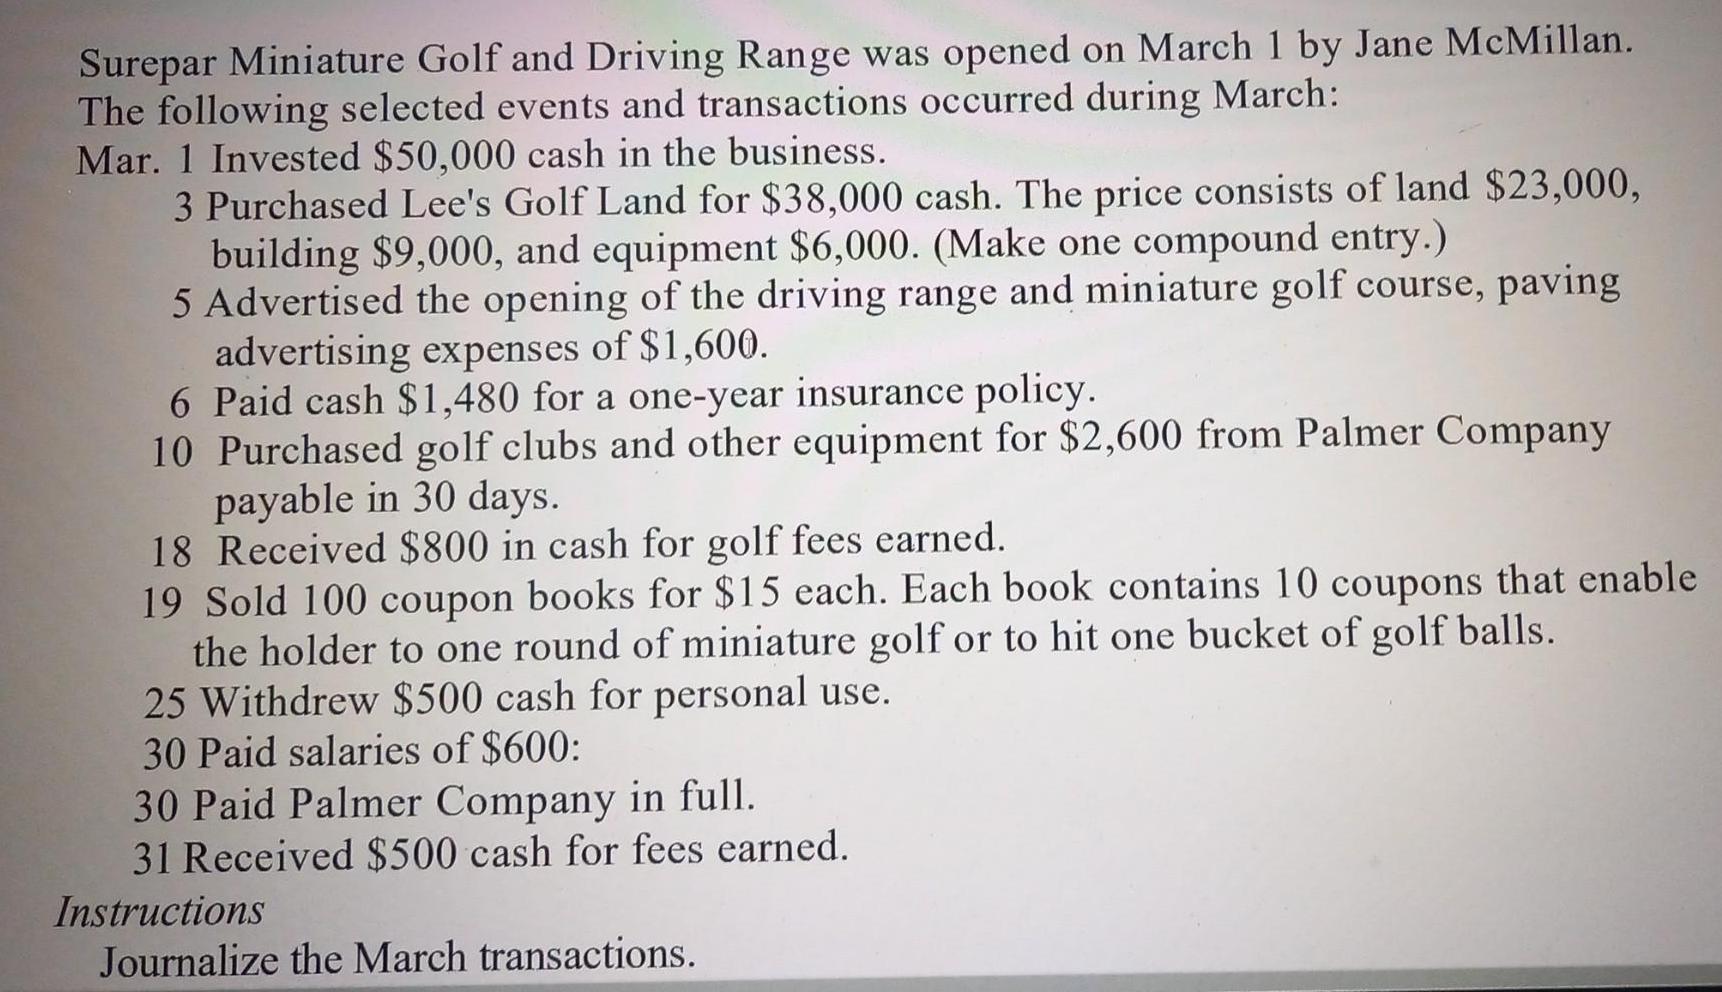 Surepar Miniature Golf and Driving Range was opened on March 1 by Jane McMillan. The following selected